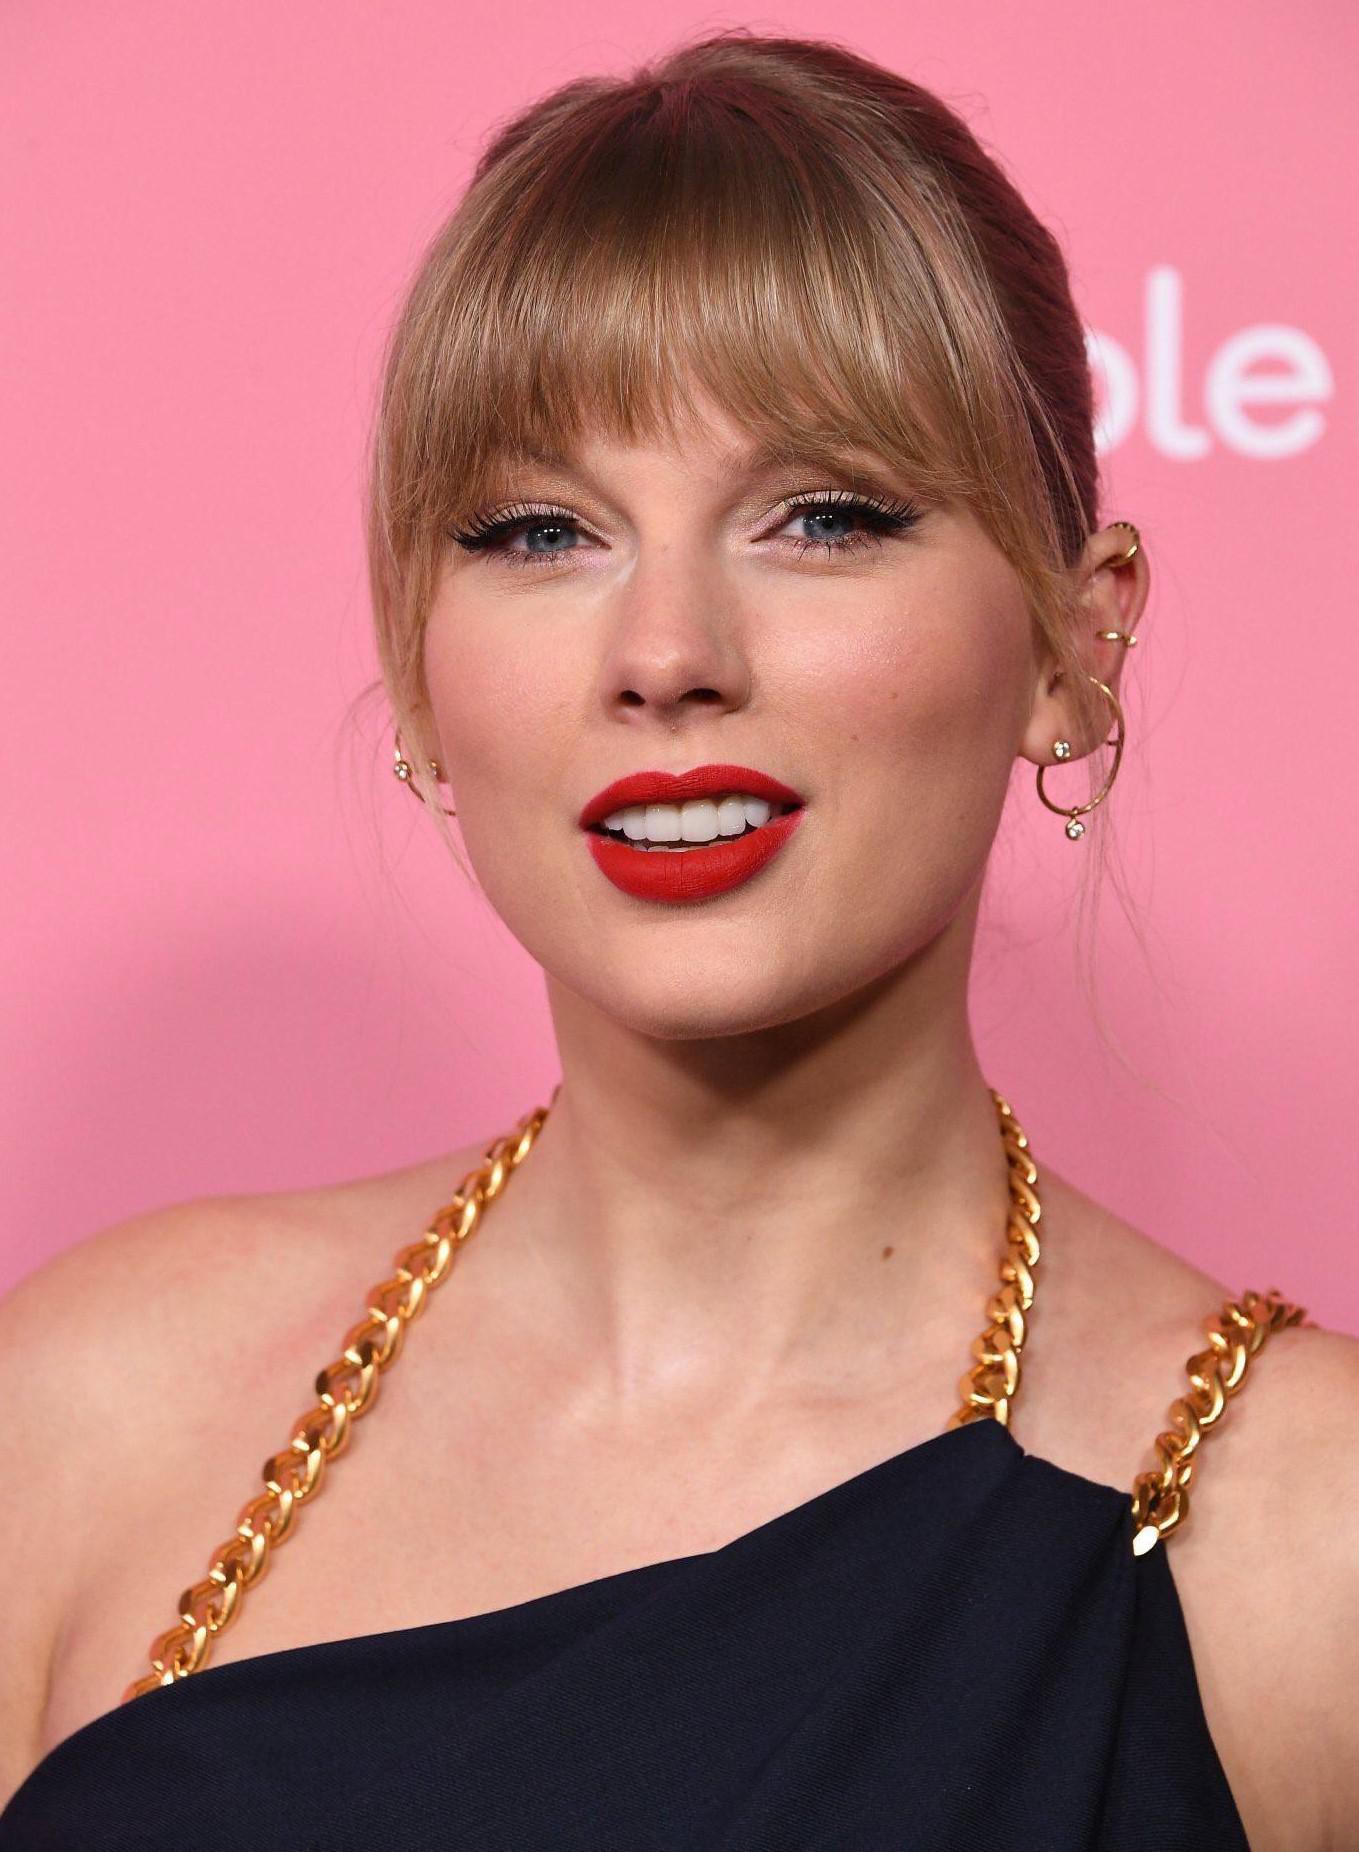 Smile | Taylor Swift Sexy: Celebrity Outfit Ideas,  Sexy Girl,  hottest celebs,  Taylor Swift,  Taylor Swift Instagram,  Taylor Swift hairstyle,  Taylor Swift lips  